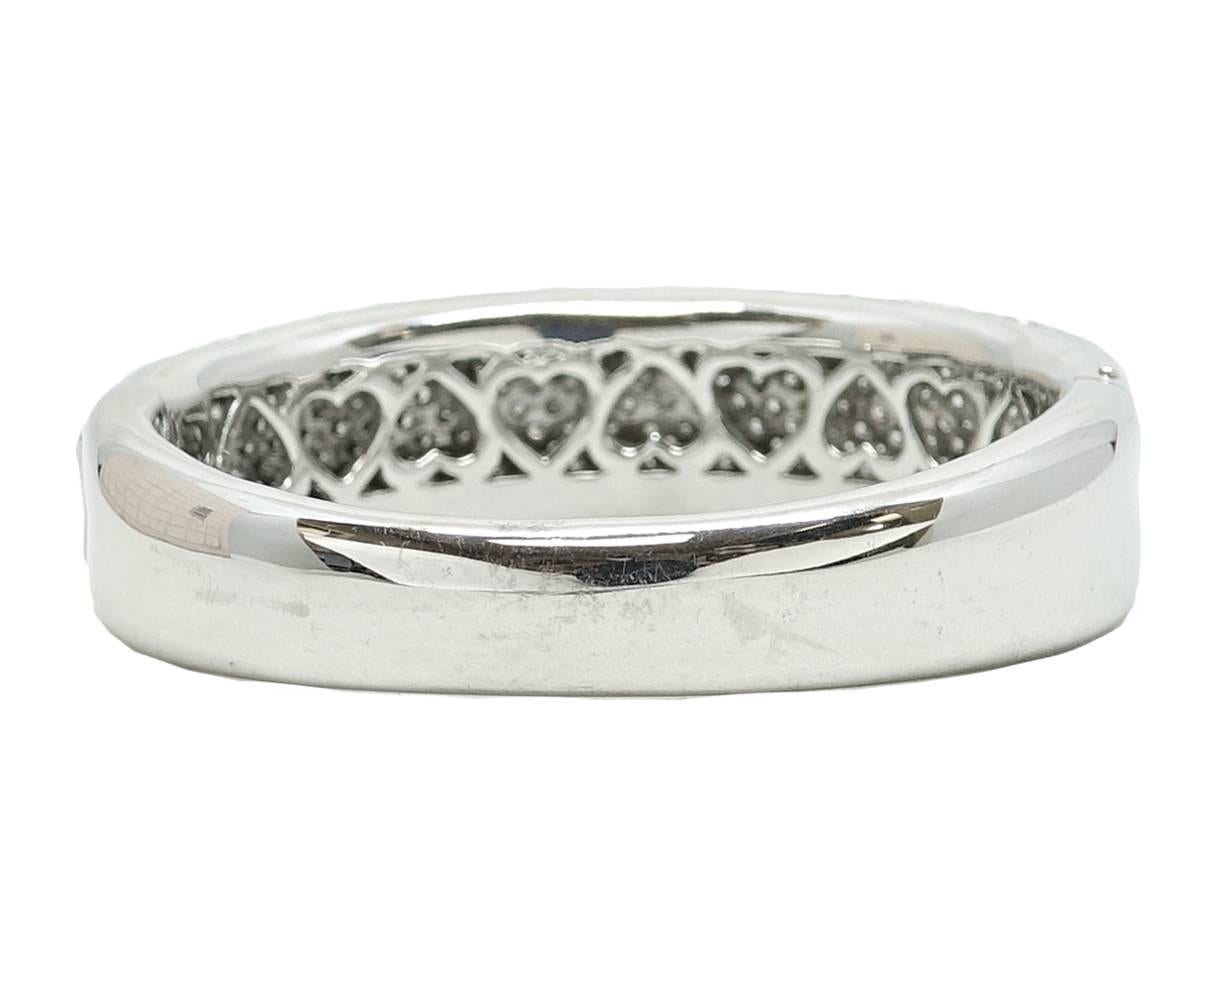 This 18K White Gold Bangle Is Covered In Diamonds And Sure To Make A Statement. These Diamonds Weigh A Total Carat Weight Of 10.58 Carats. This Lovelt Bangle Is 7.5 Inches Around. 